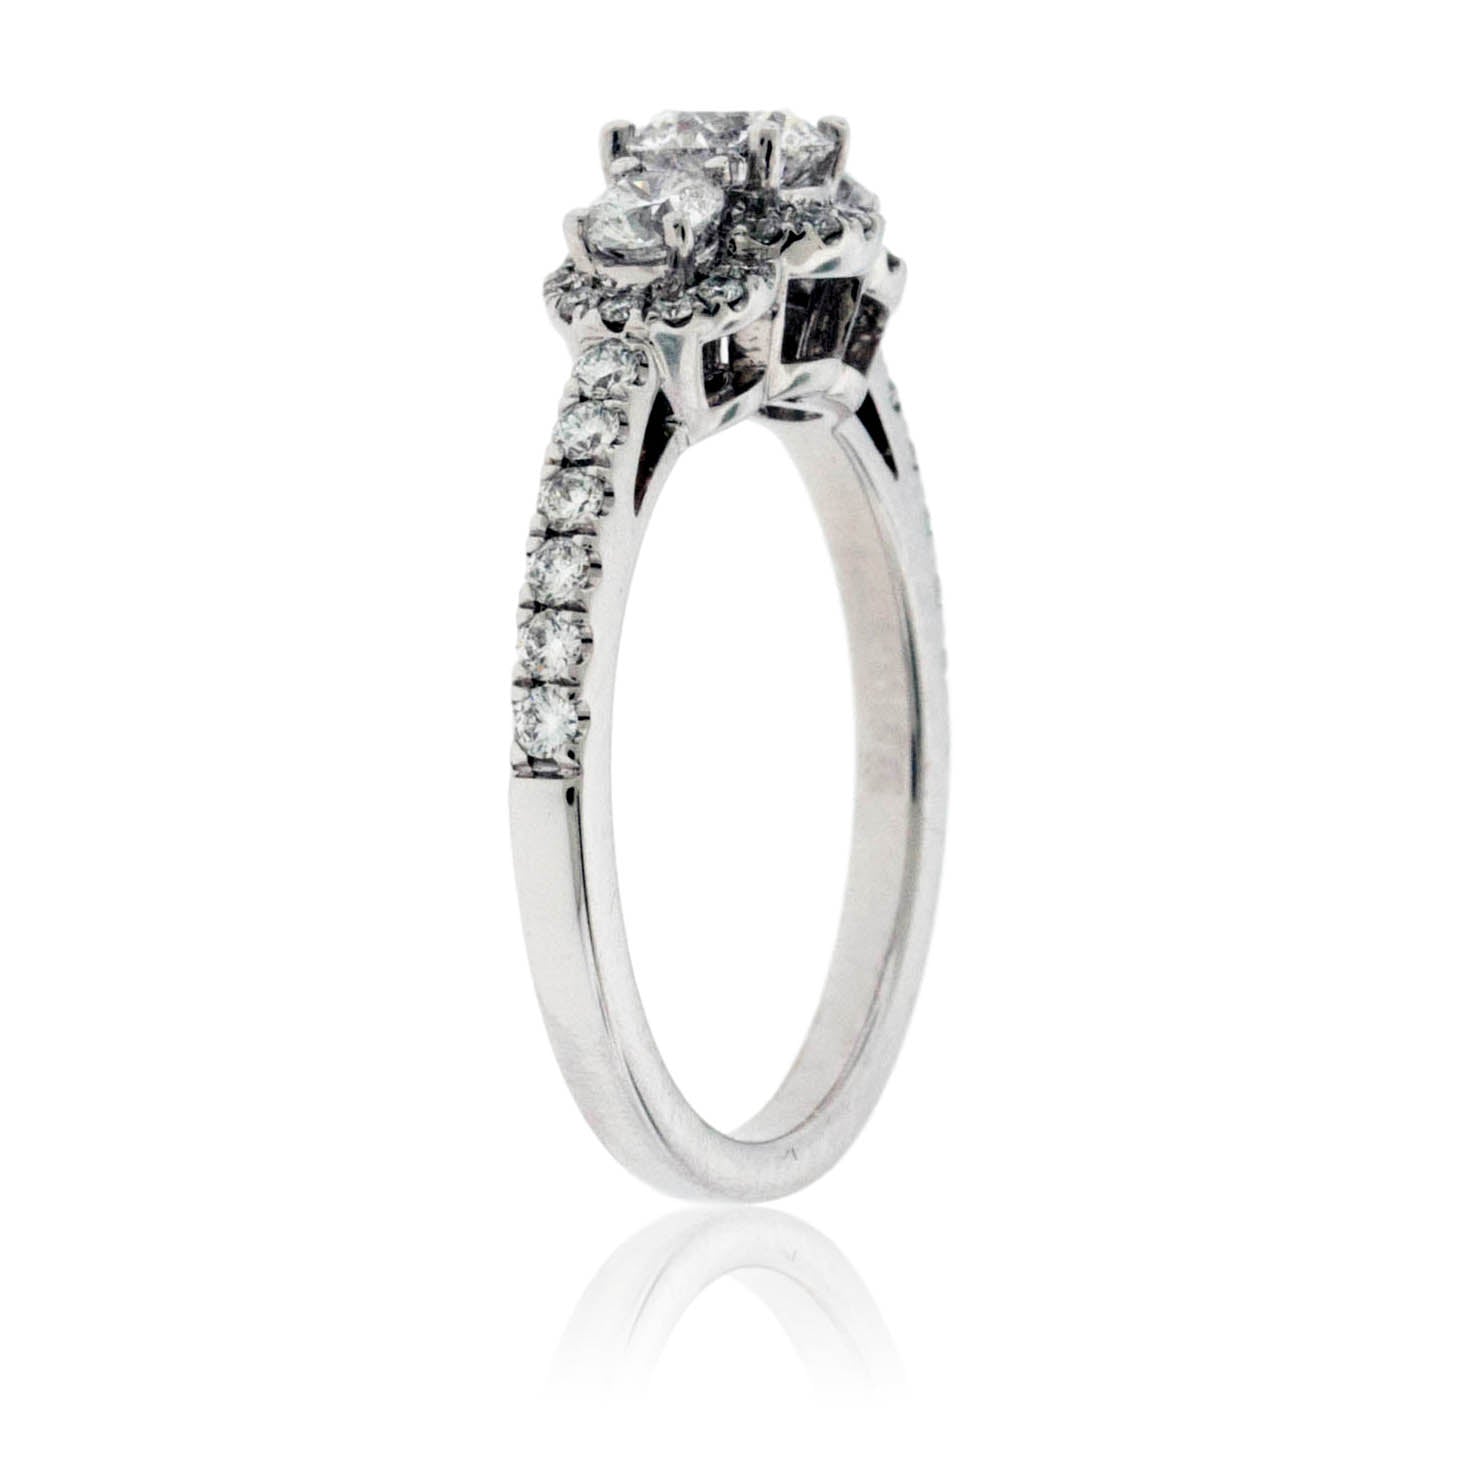 Shop the Diamonds Forever Engagement Ring DIA-901471A | Good Old Gold